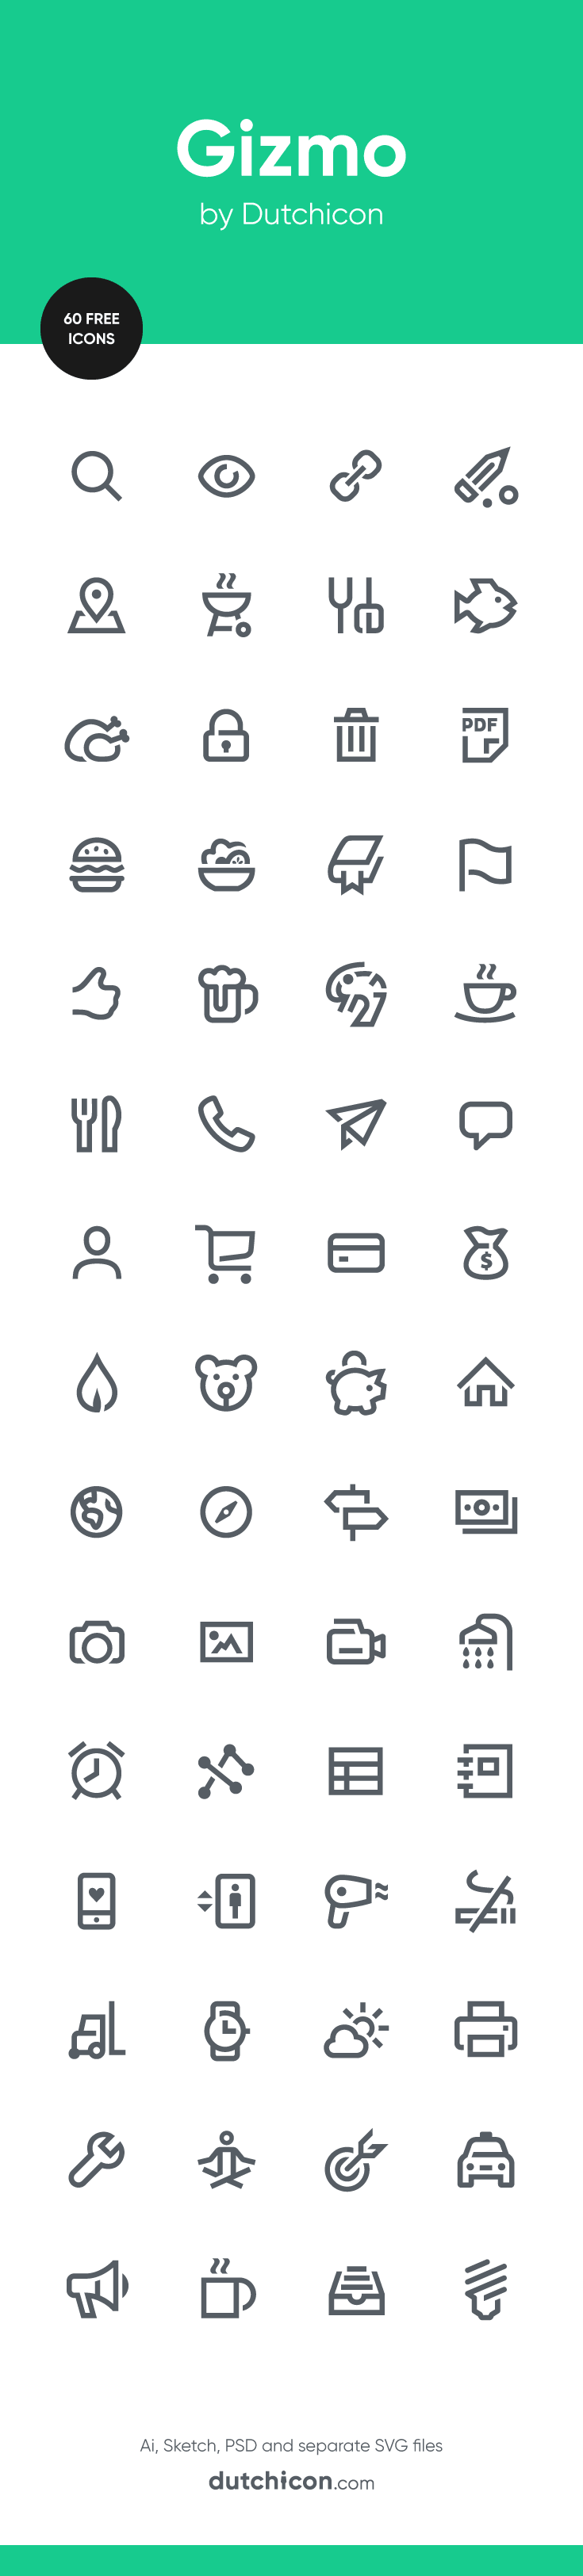 60 FREE icons in Gizmo style available at Dutchicon.com. Direct download: https://dutchicon-store.myshopify.com/cart/30859840402:1?channel=buy_button